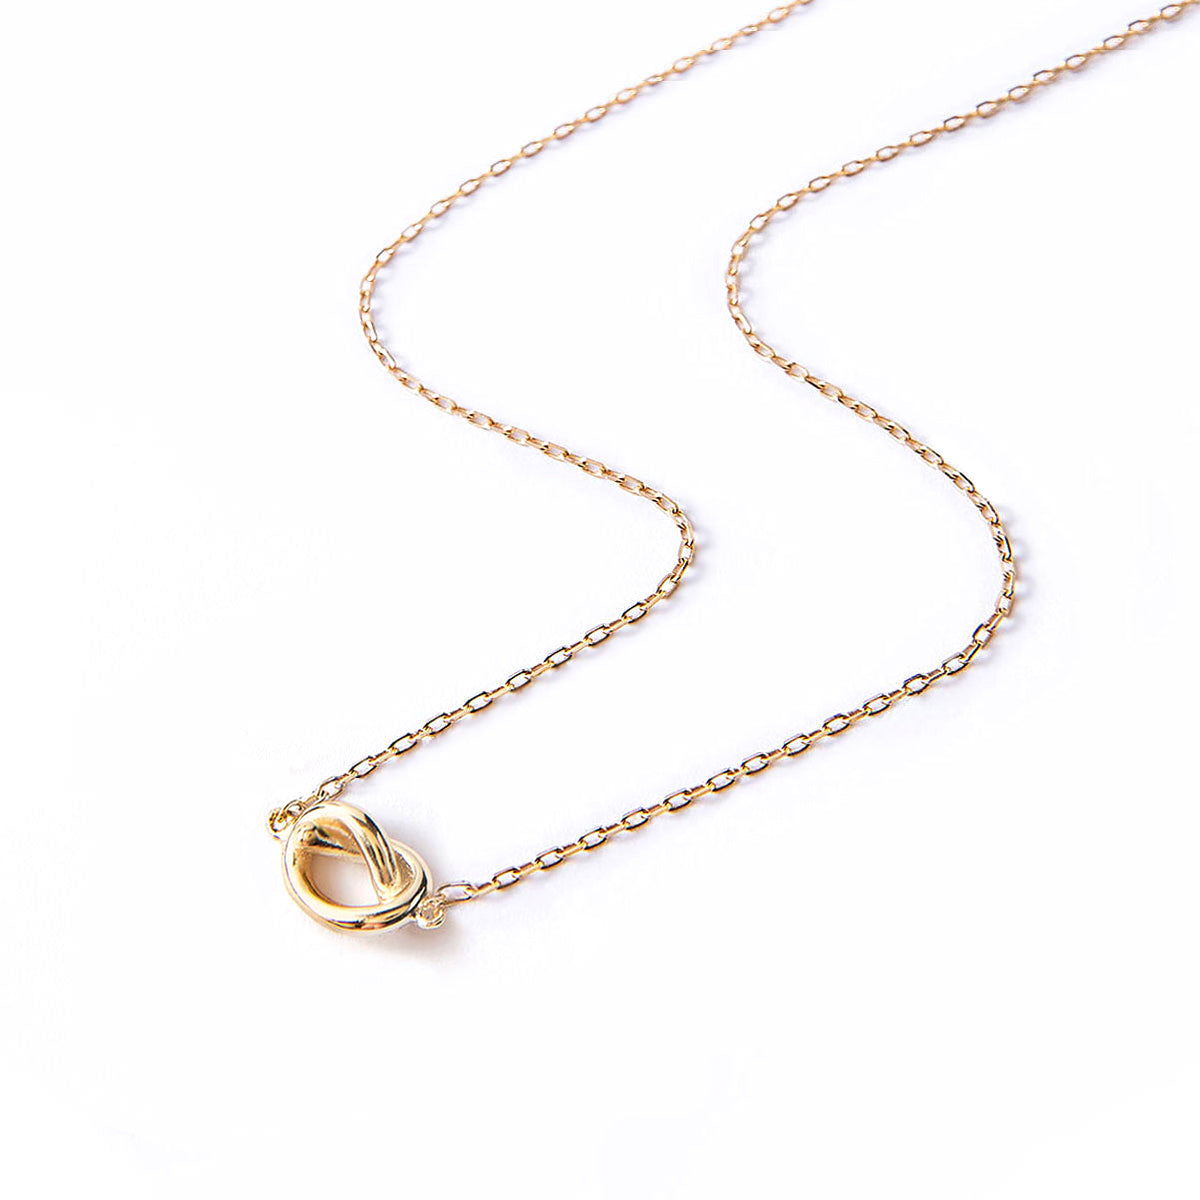 Gold Love Knot Necklace, Dainty Delicate Minimal Necklaces for Women ...